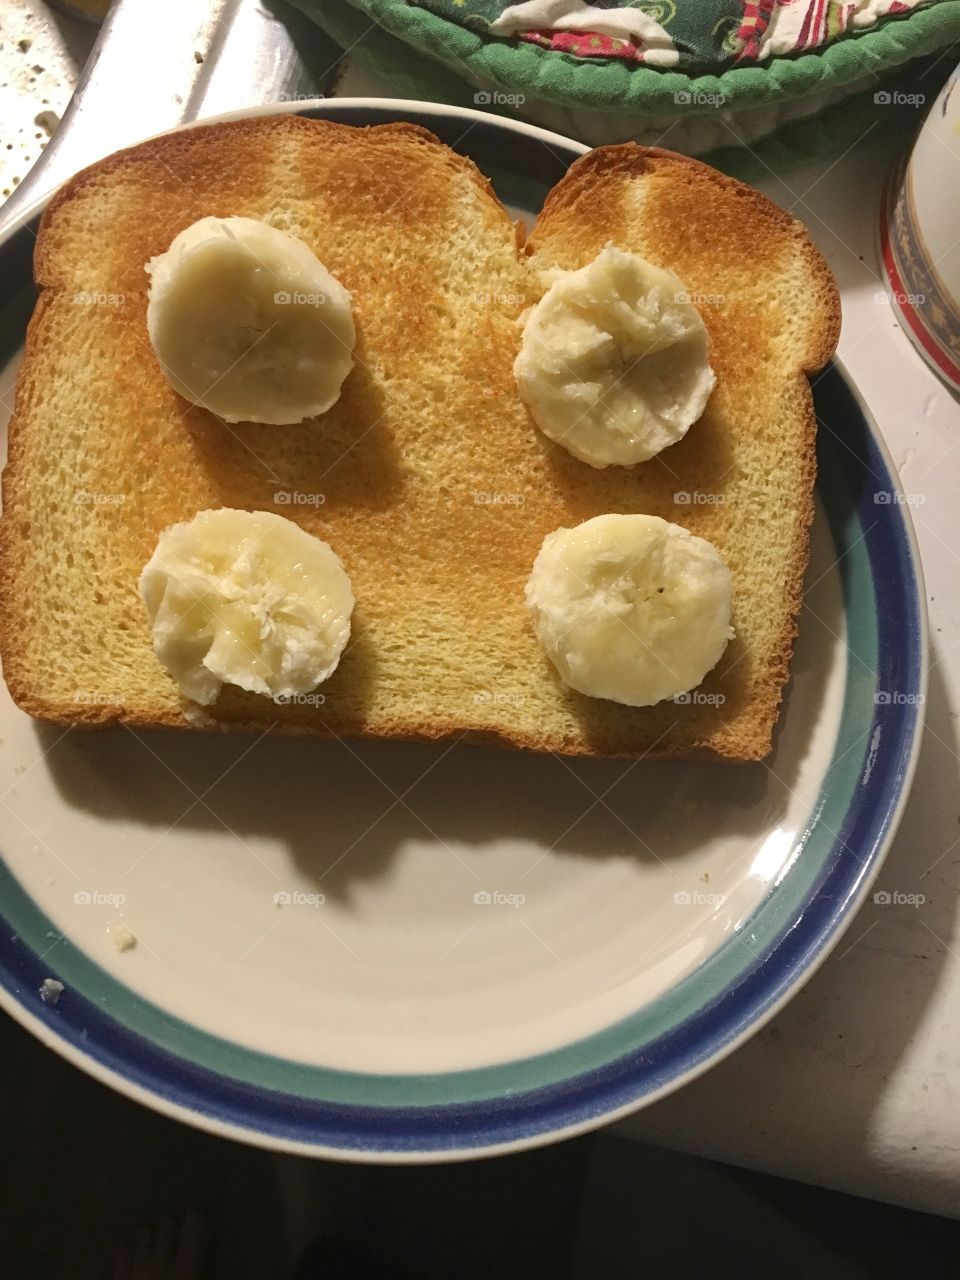 Golden toast with banana slices, on the kitchen counter ready-to-eat.